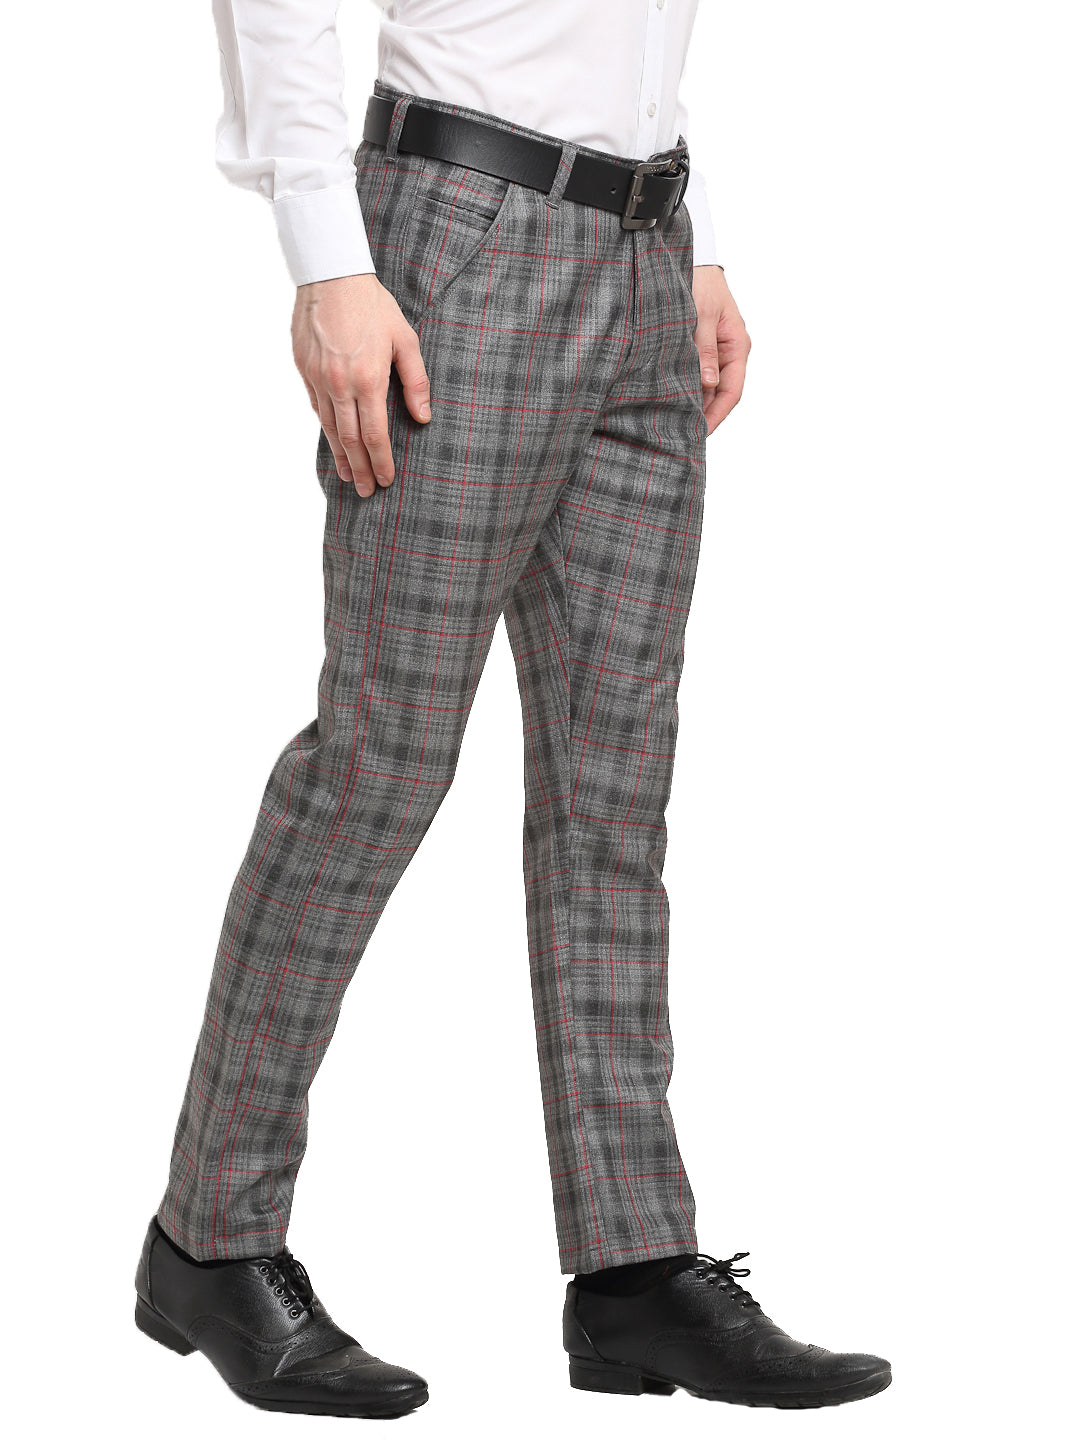 Slim Fit Black & White with Brown Windowpane Trousers | Buy Online at Moss